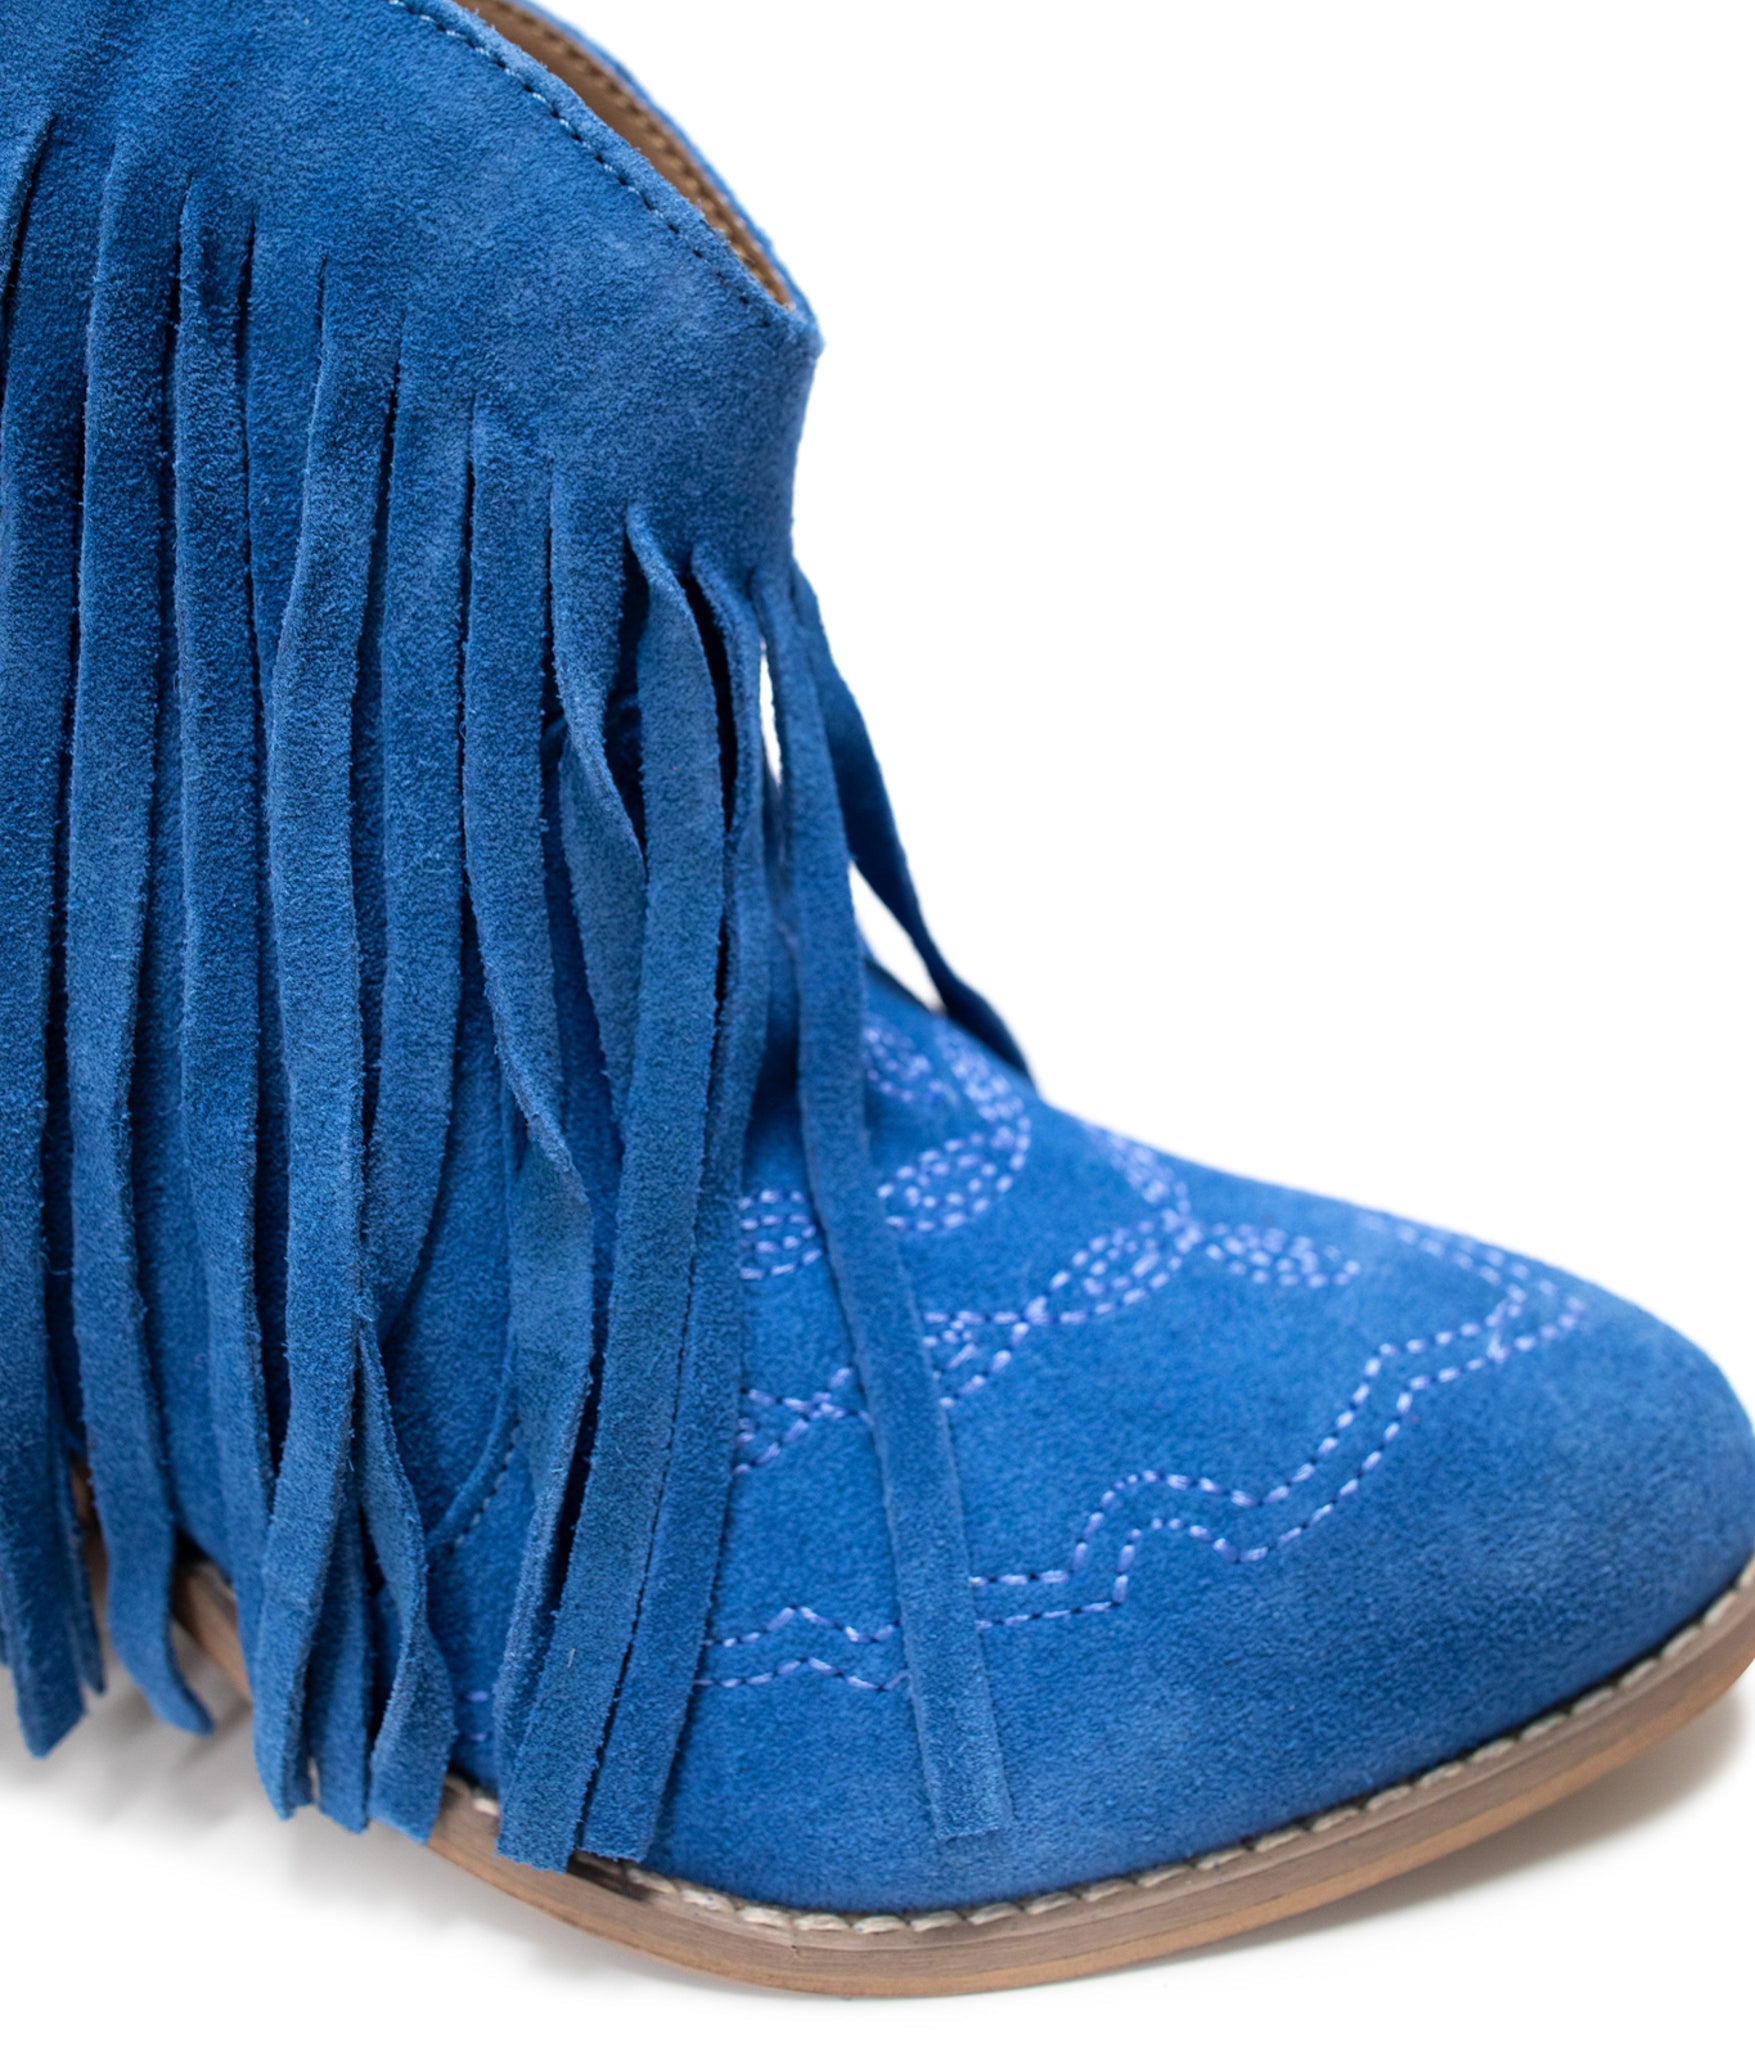 Amos Fringe Ankle Bootie in Blue Suede